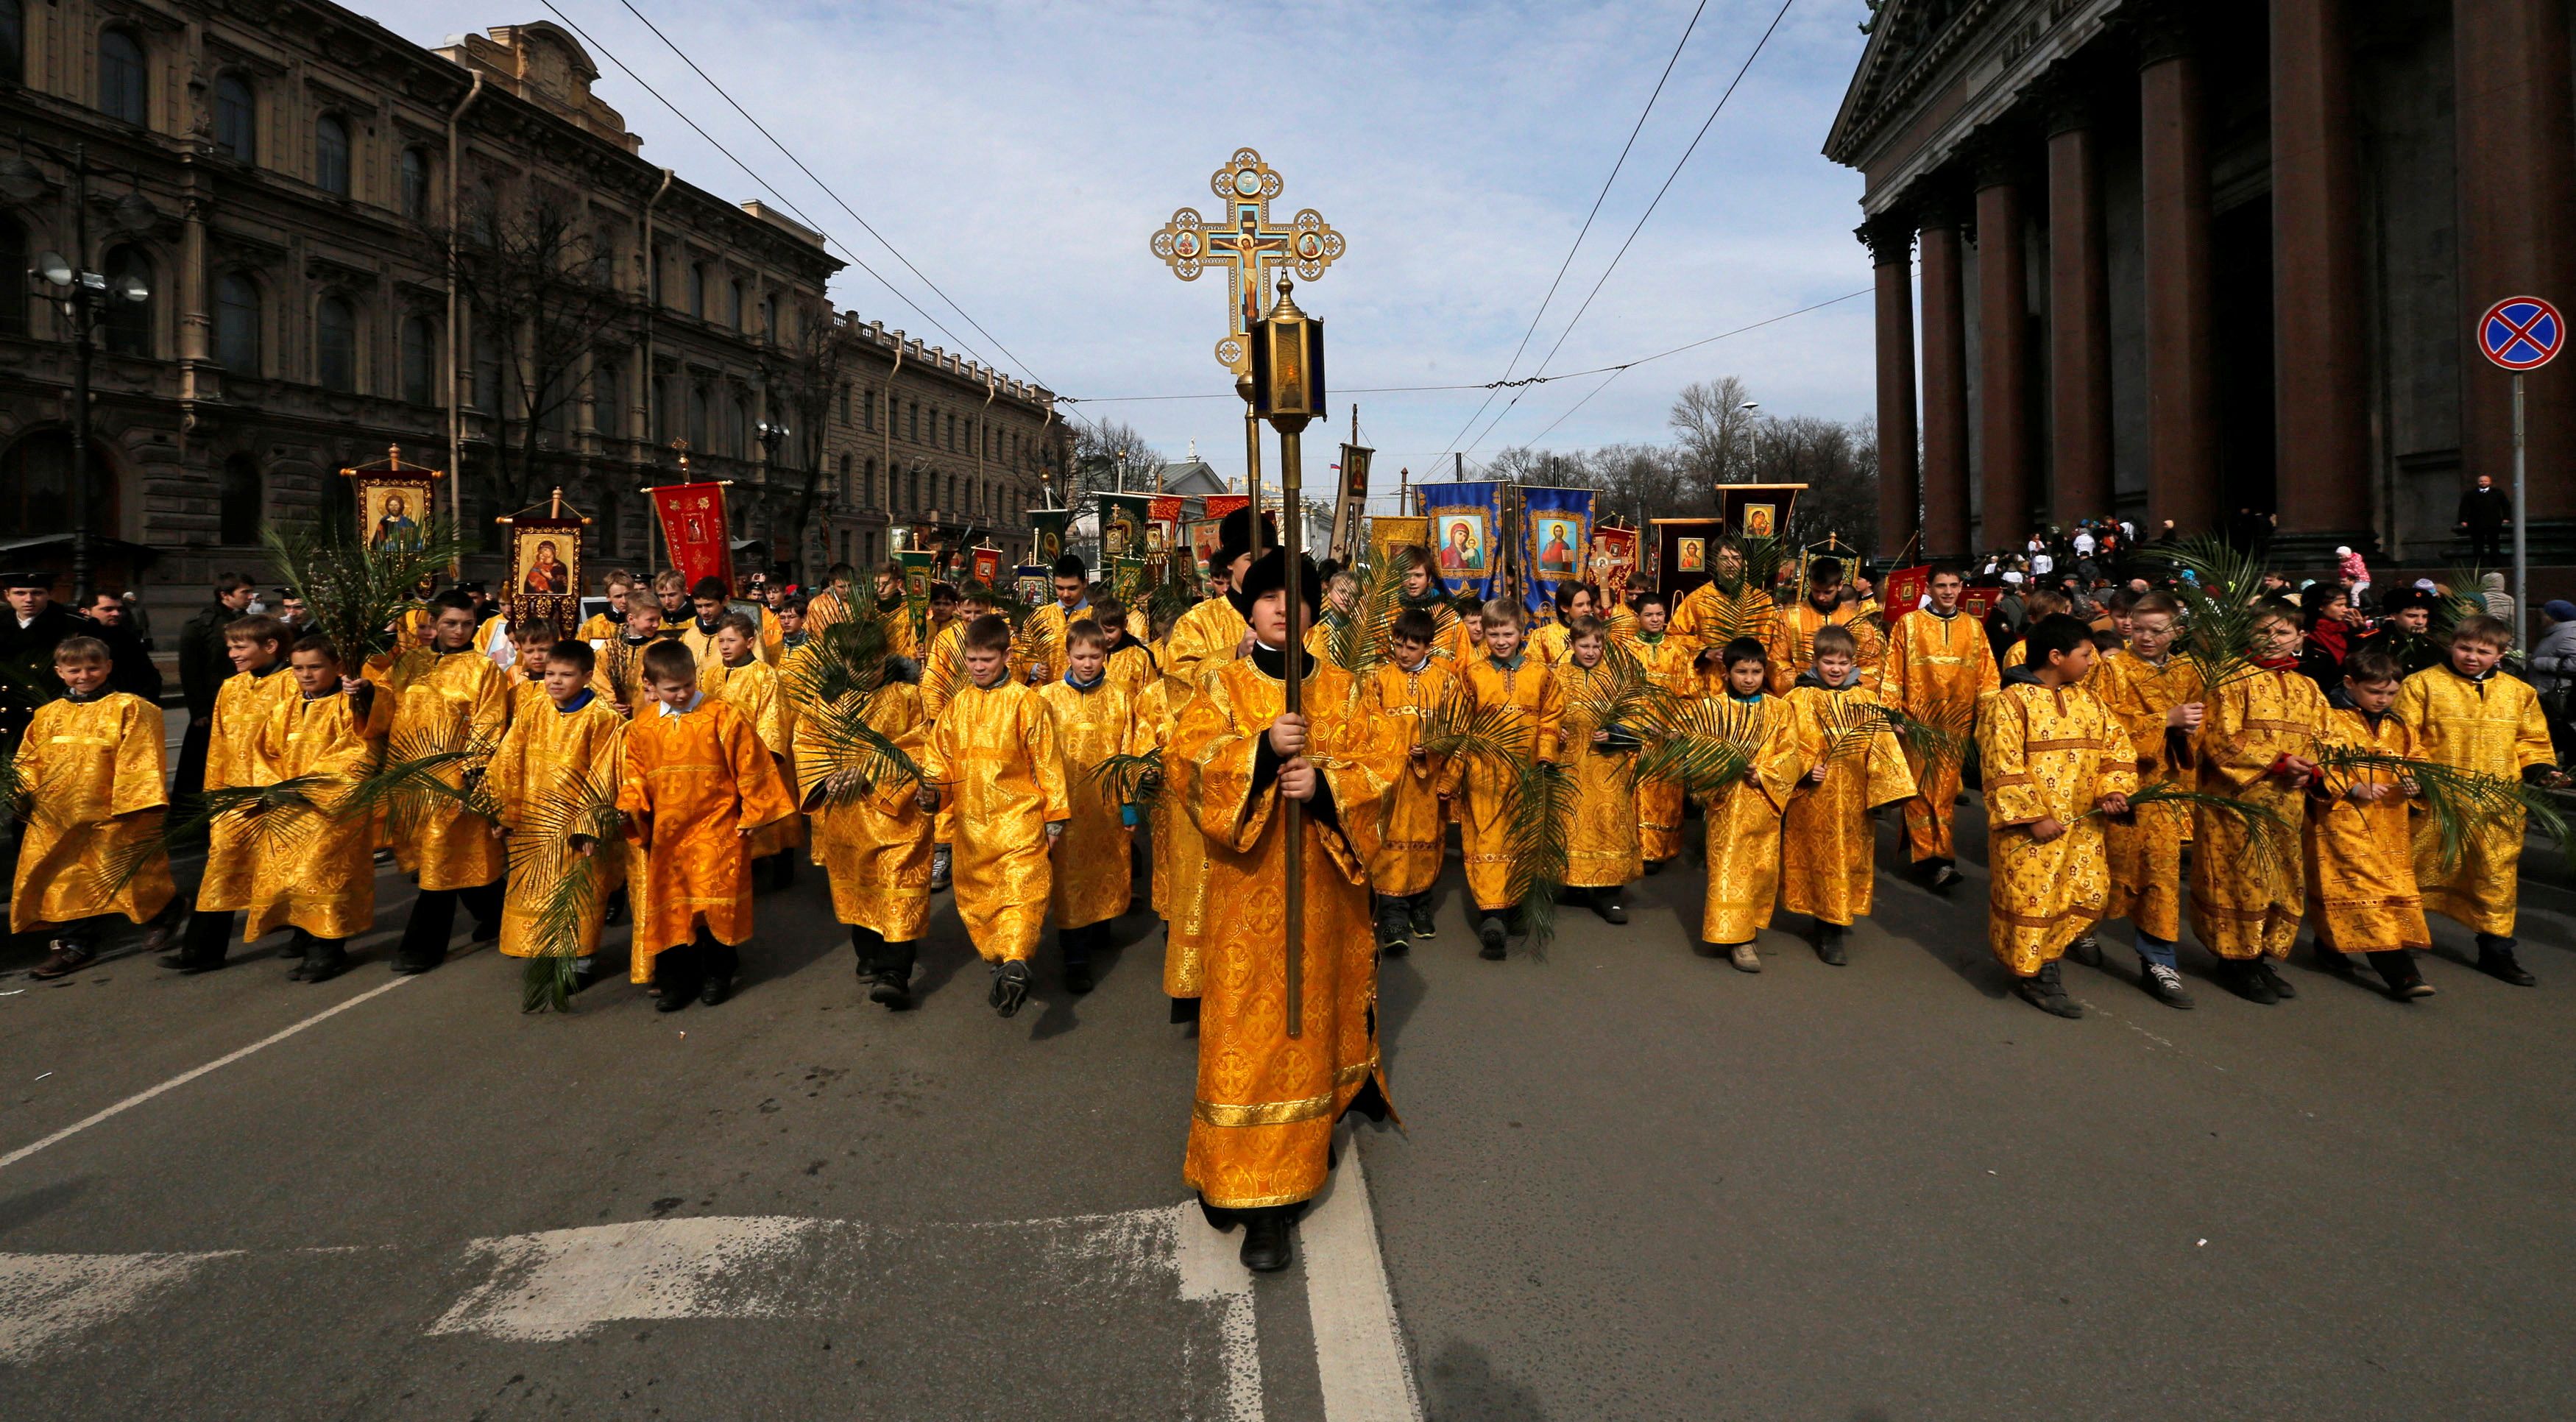 Children take part in a religious procession to mark Palm Sunday in St. Petersburg